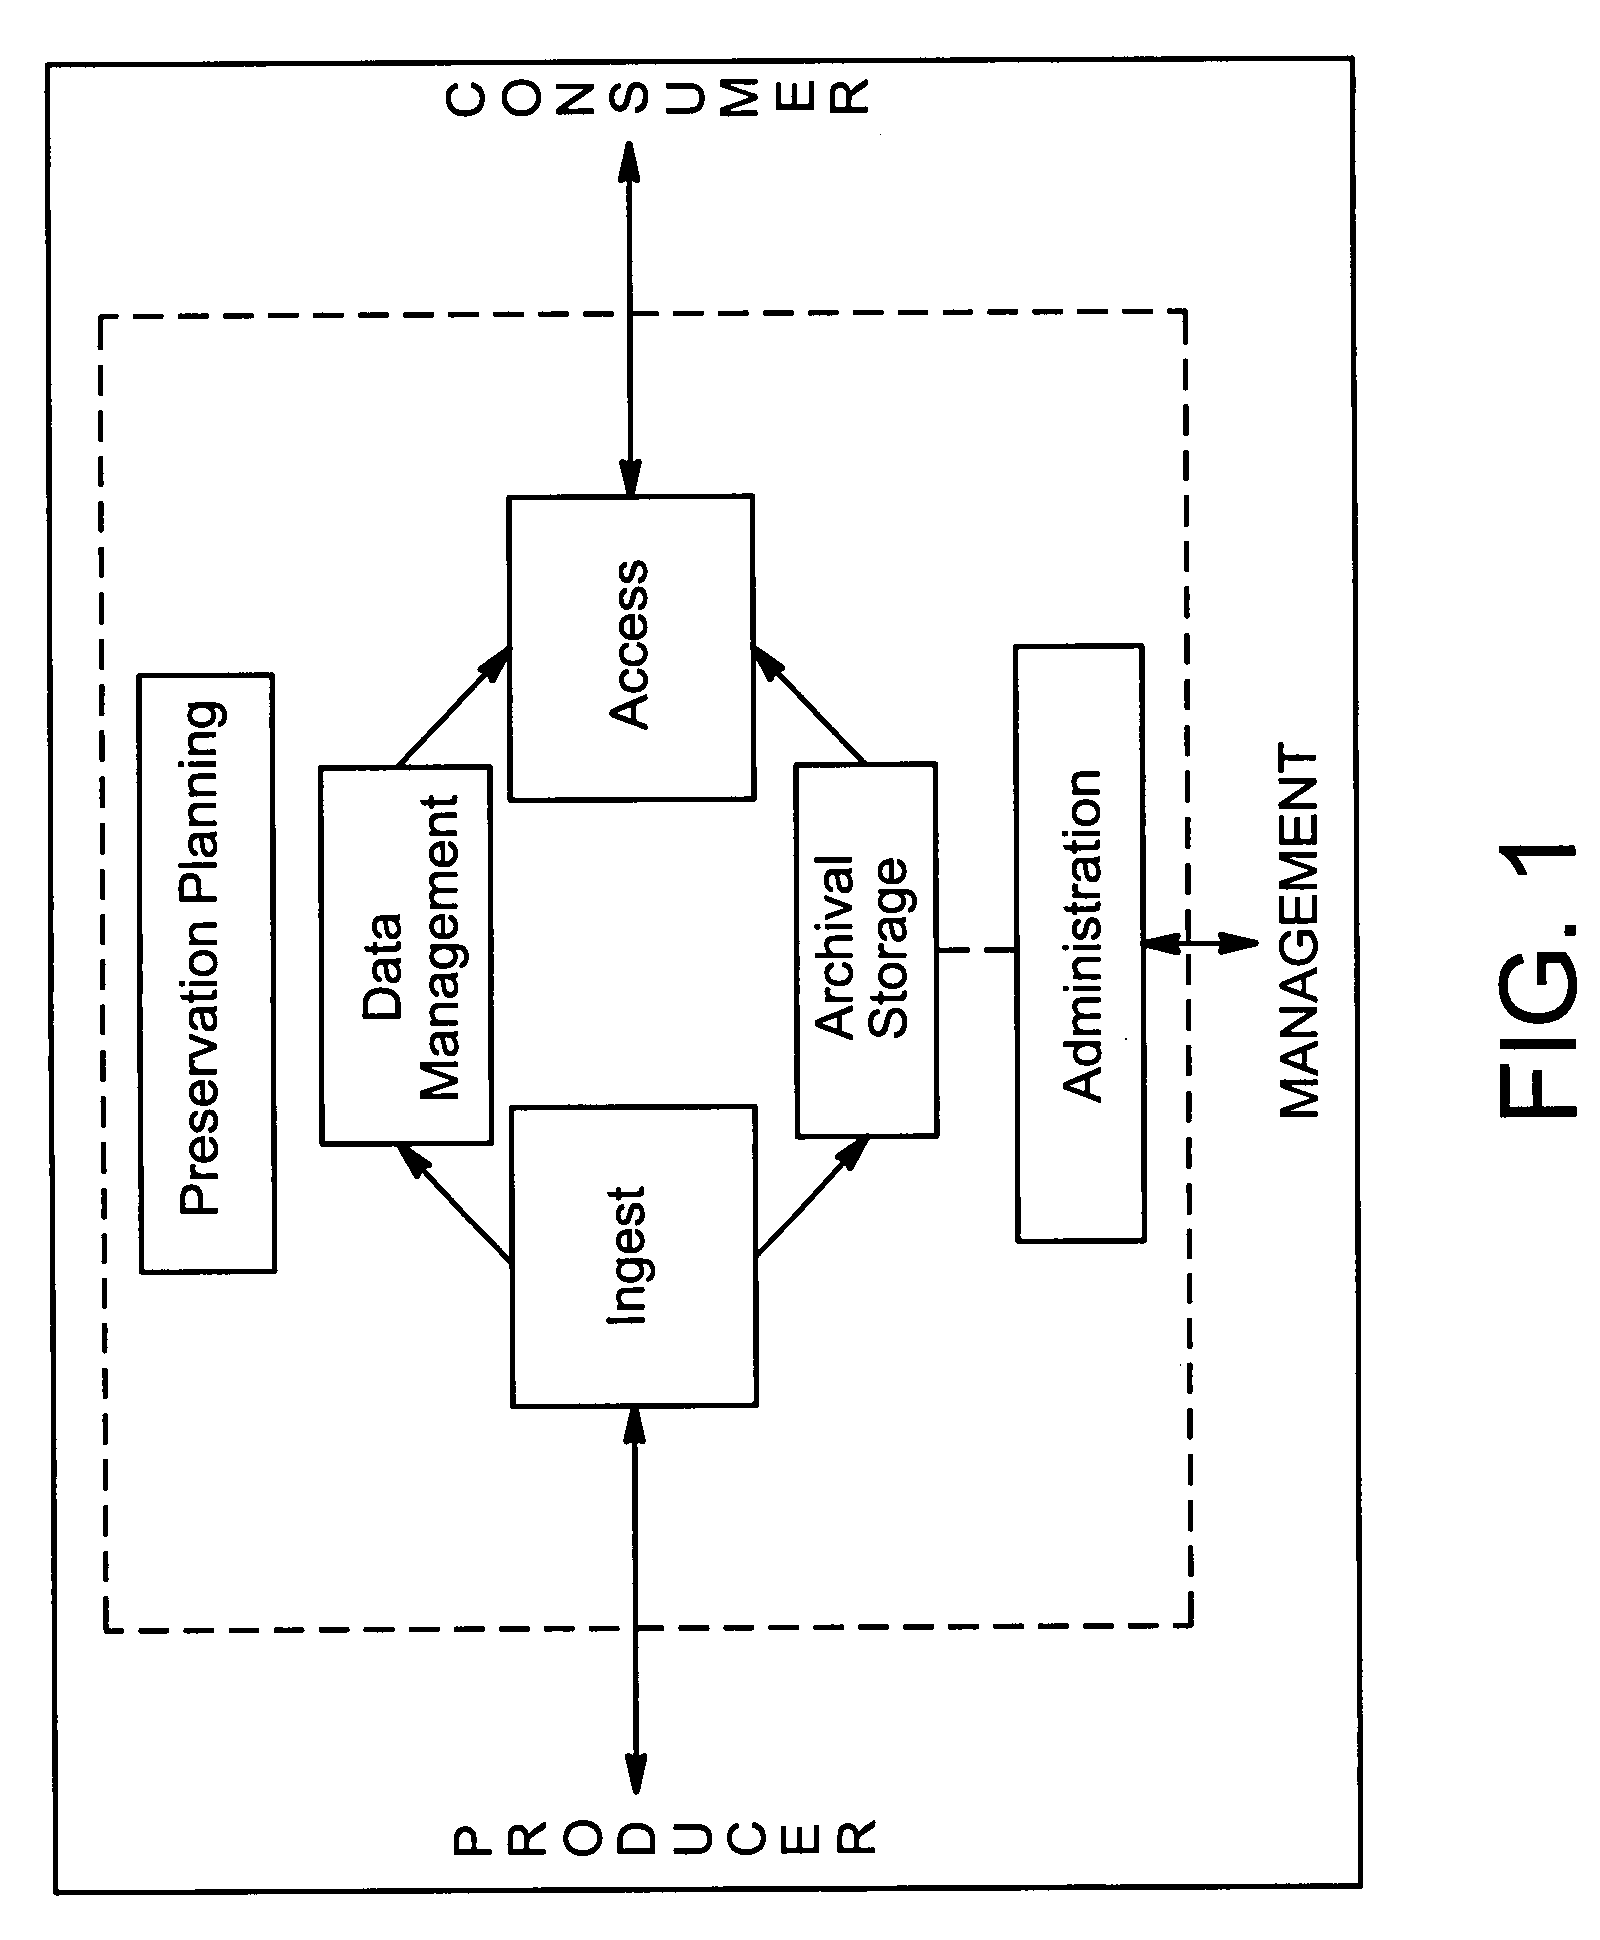 System and method for immutably cataloging electronic assets in a large-scale computer system